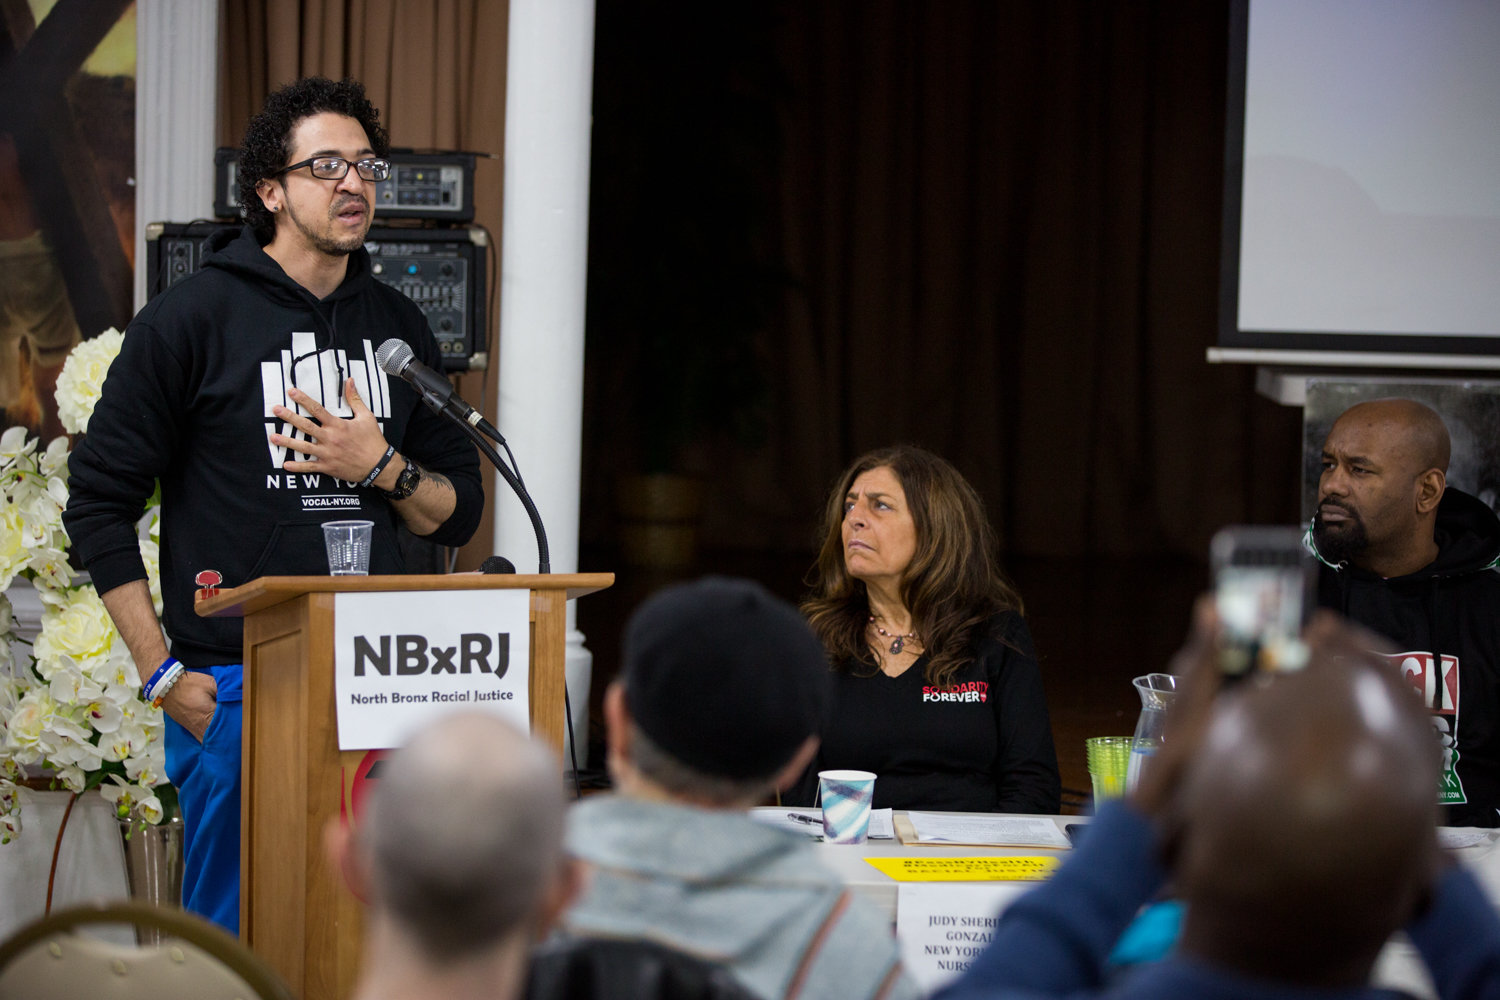 VOCAL-NY member Felix Guzman talks about his experience as a formerly incarcerated on Rikers Island and how that has shaped his view on the need form reform in how mental health is treated.